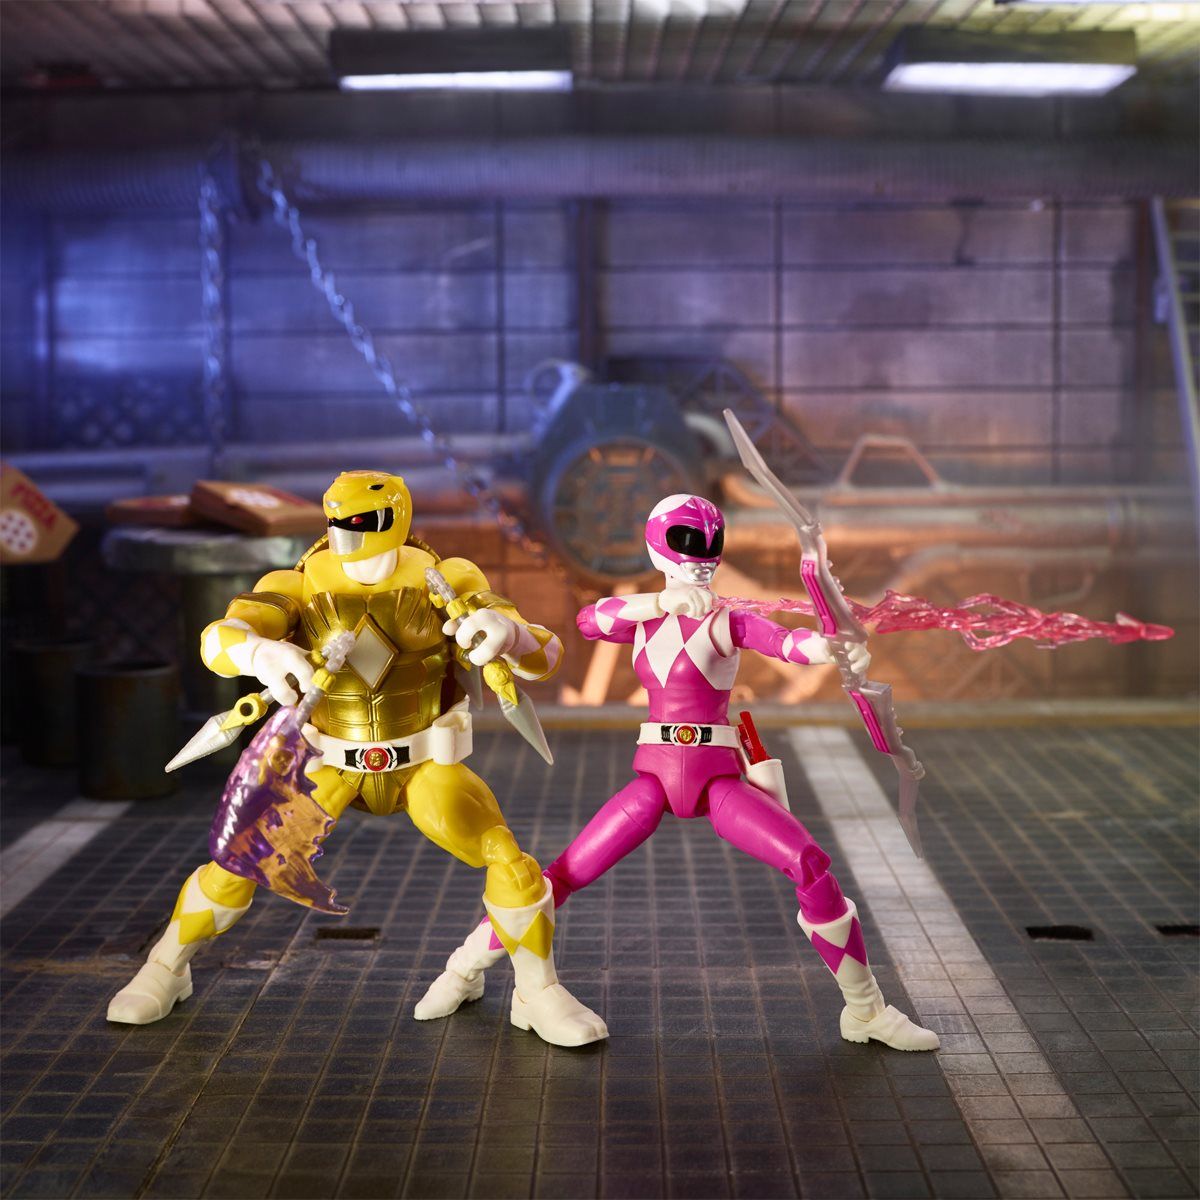 Power Rangers X TMNT Lightning Collection Figures To Look Out For